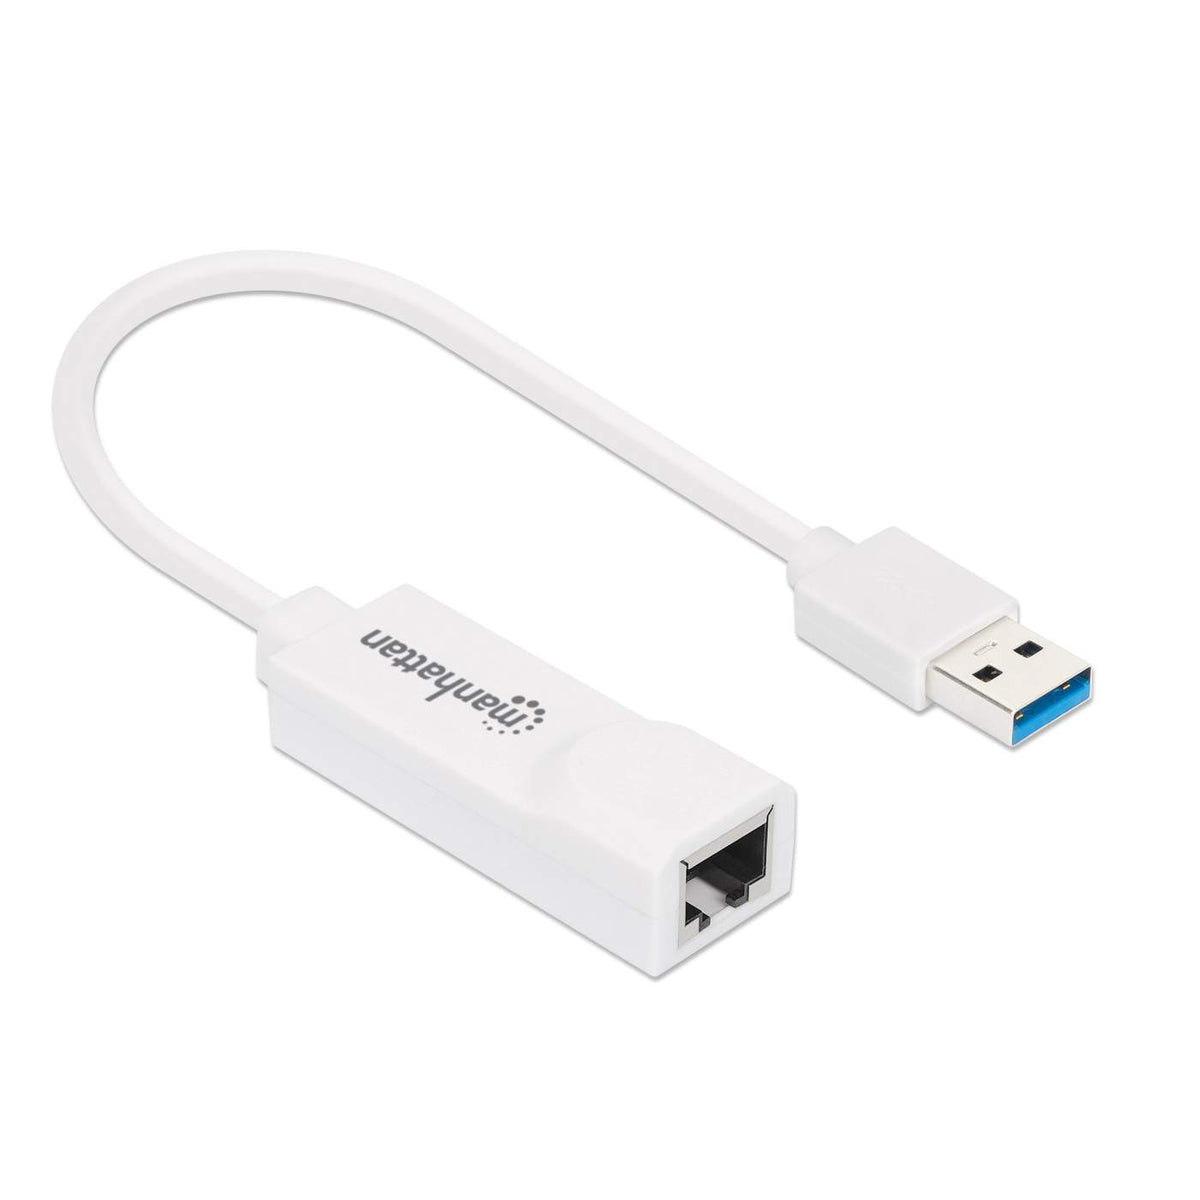 Manhattan USB To Fast Ethernet Adapter 506731 The Home, 55% OFF